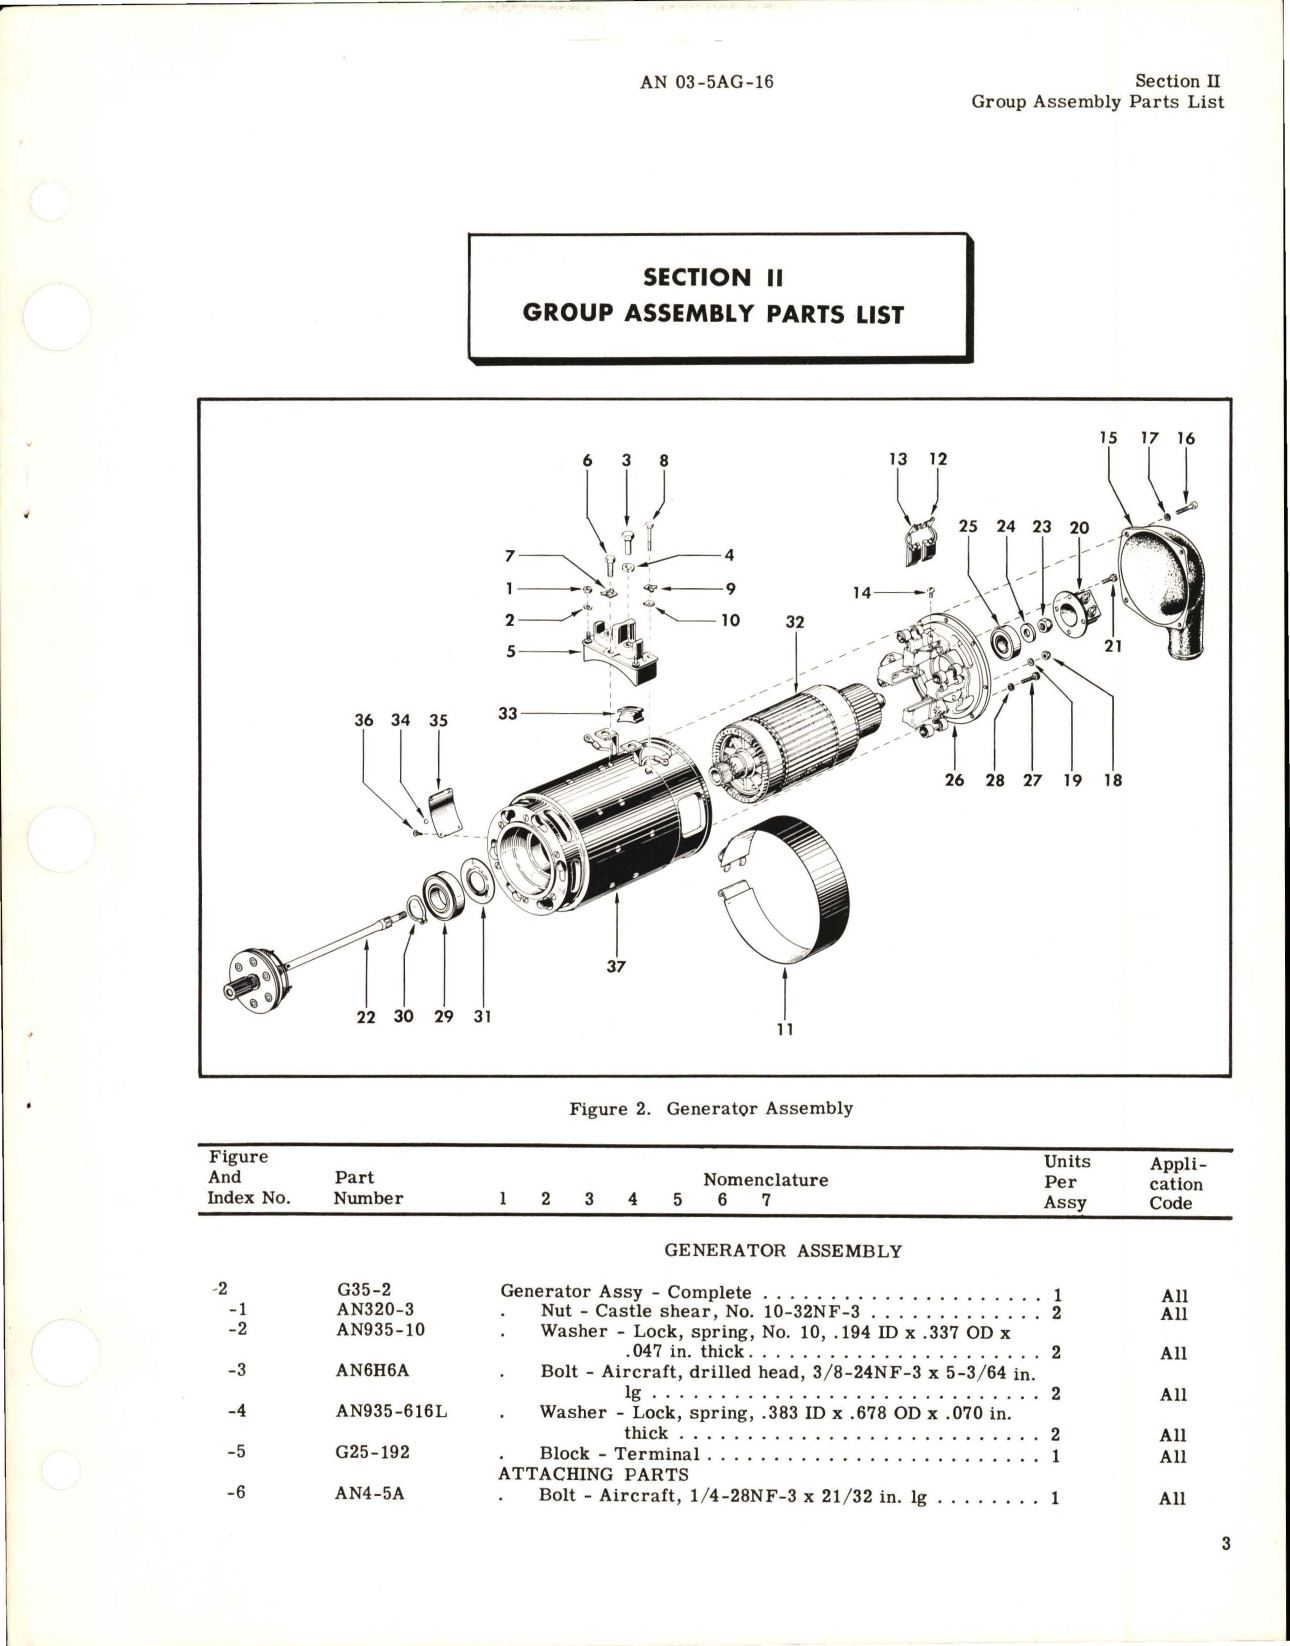 Sample page 5 from AirCorps Library document: Parts Catalog for Generator - Model G35-2